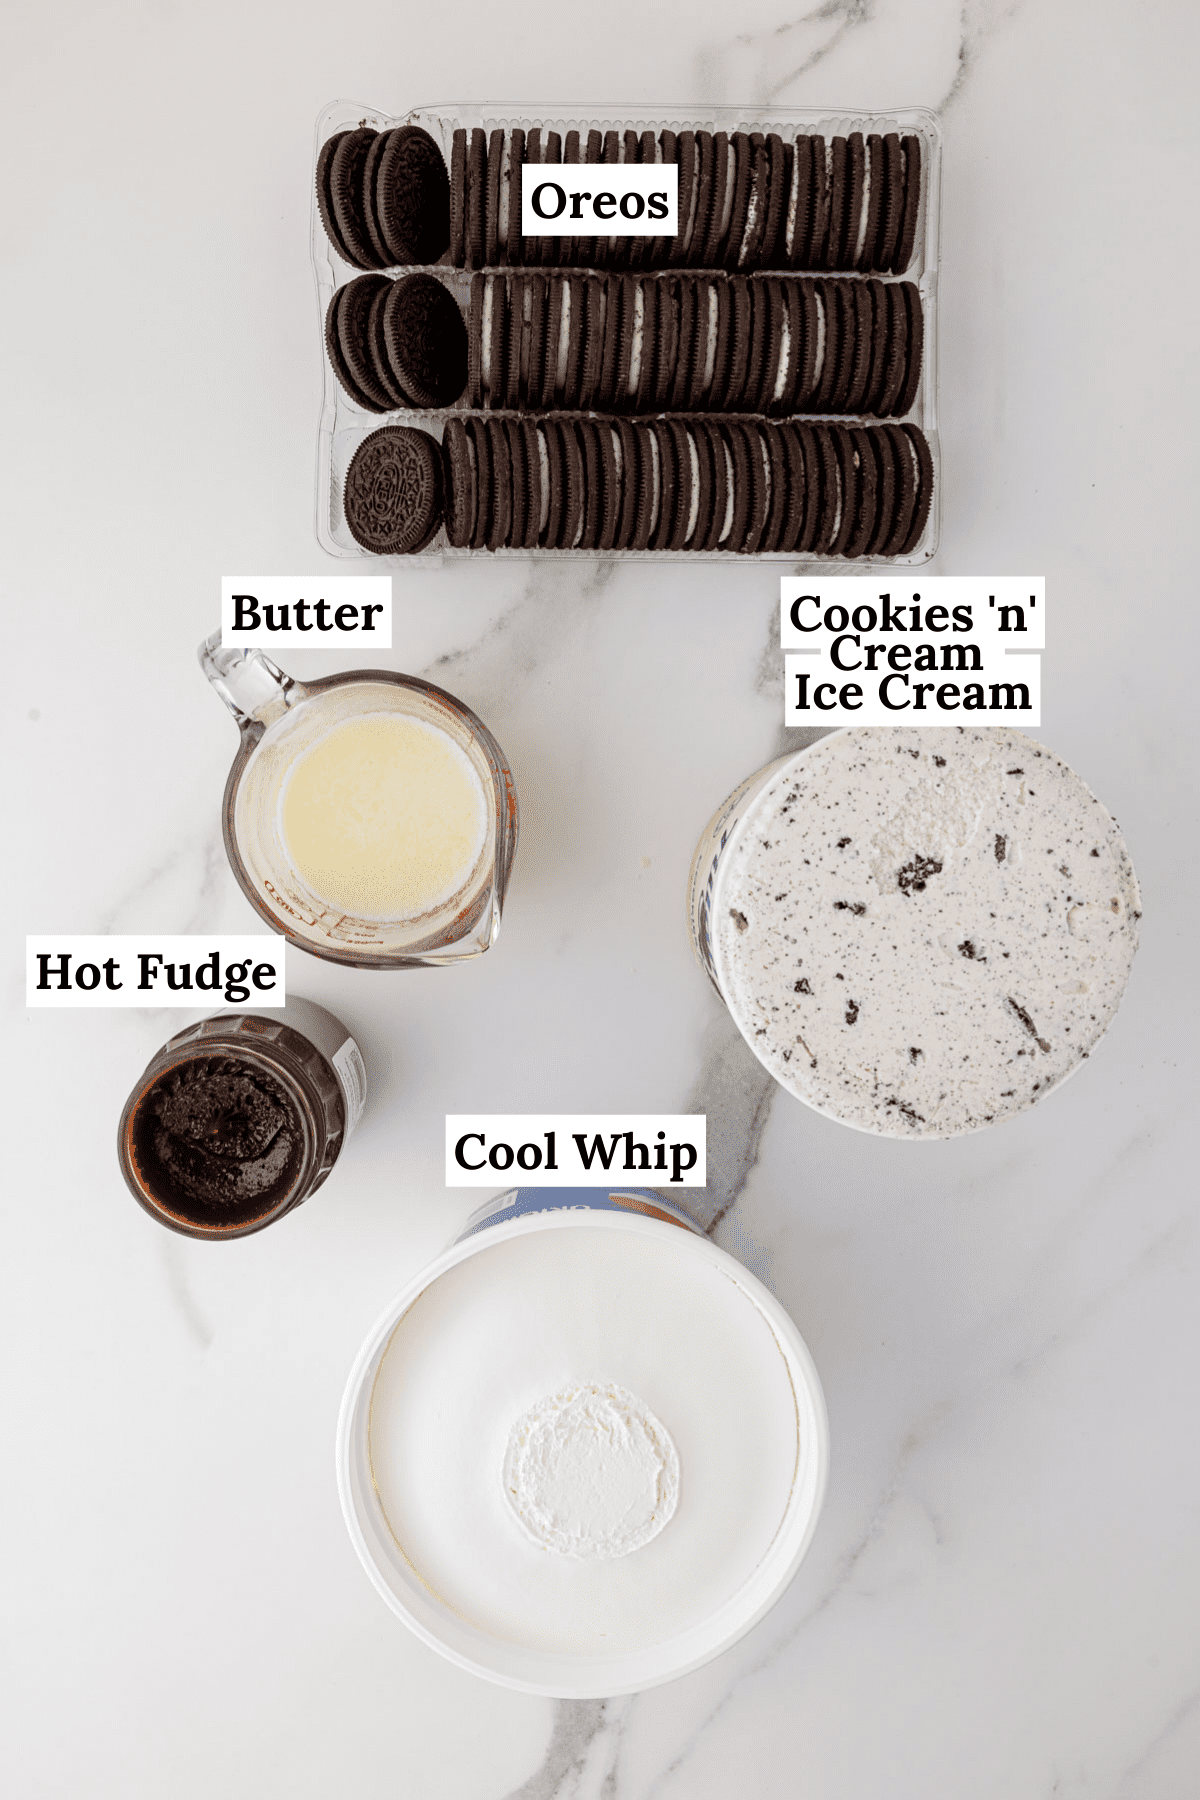 ingredients for oreo ice cream cake including butter, hot fuge, cookies and cream ice cream, cool whip and oreos